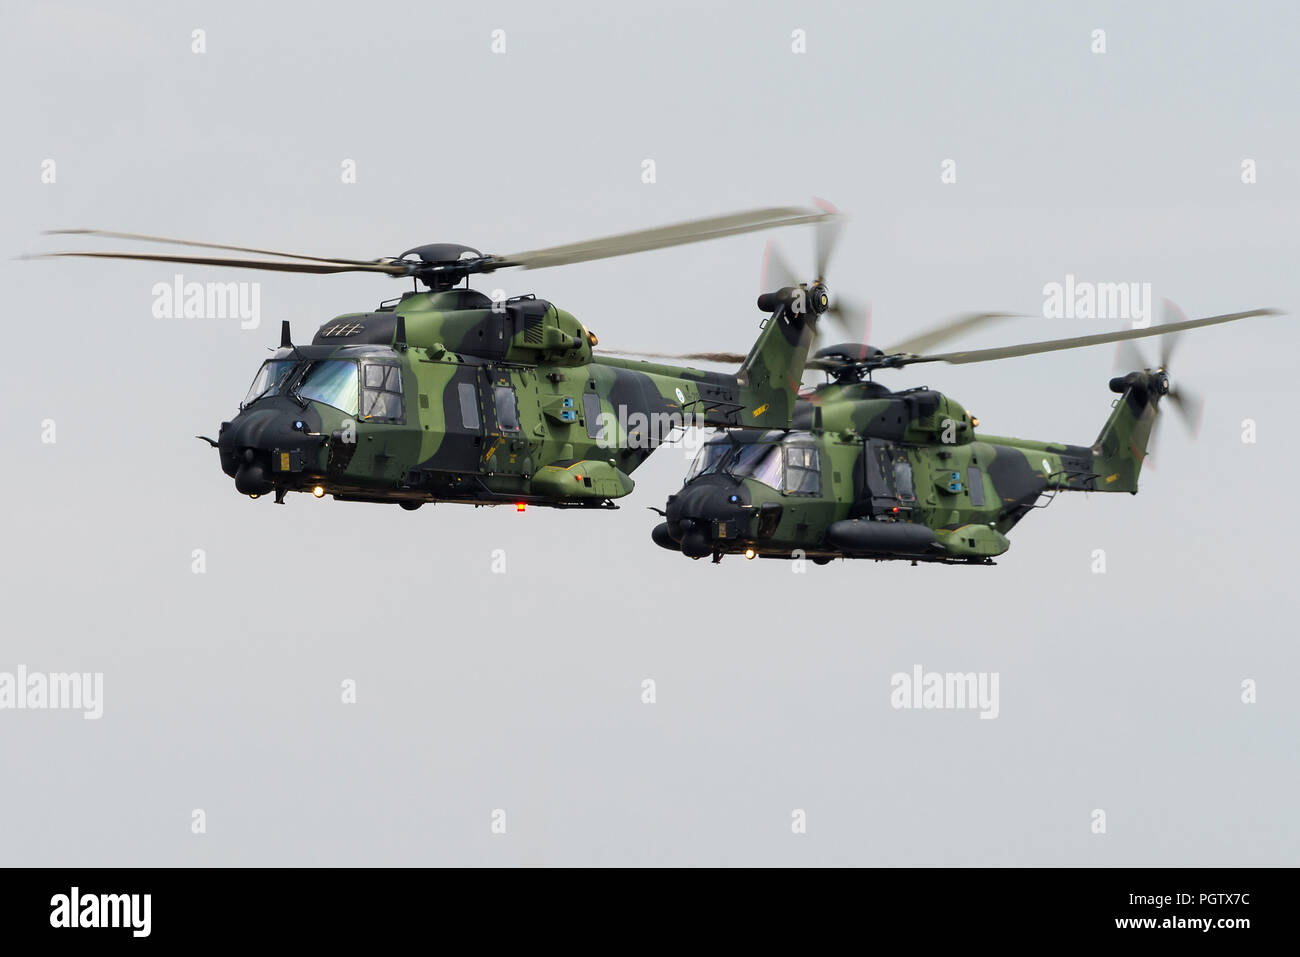 Two NHIndustries NH90 TTH military helicopters from the Utti Jaeger Regiment of the Finnish Army. Stock Photo